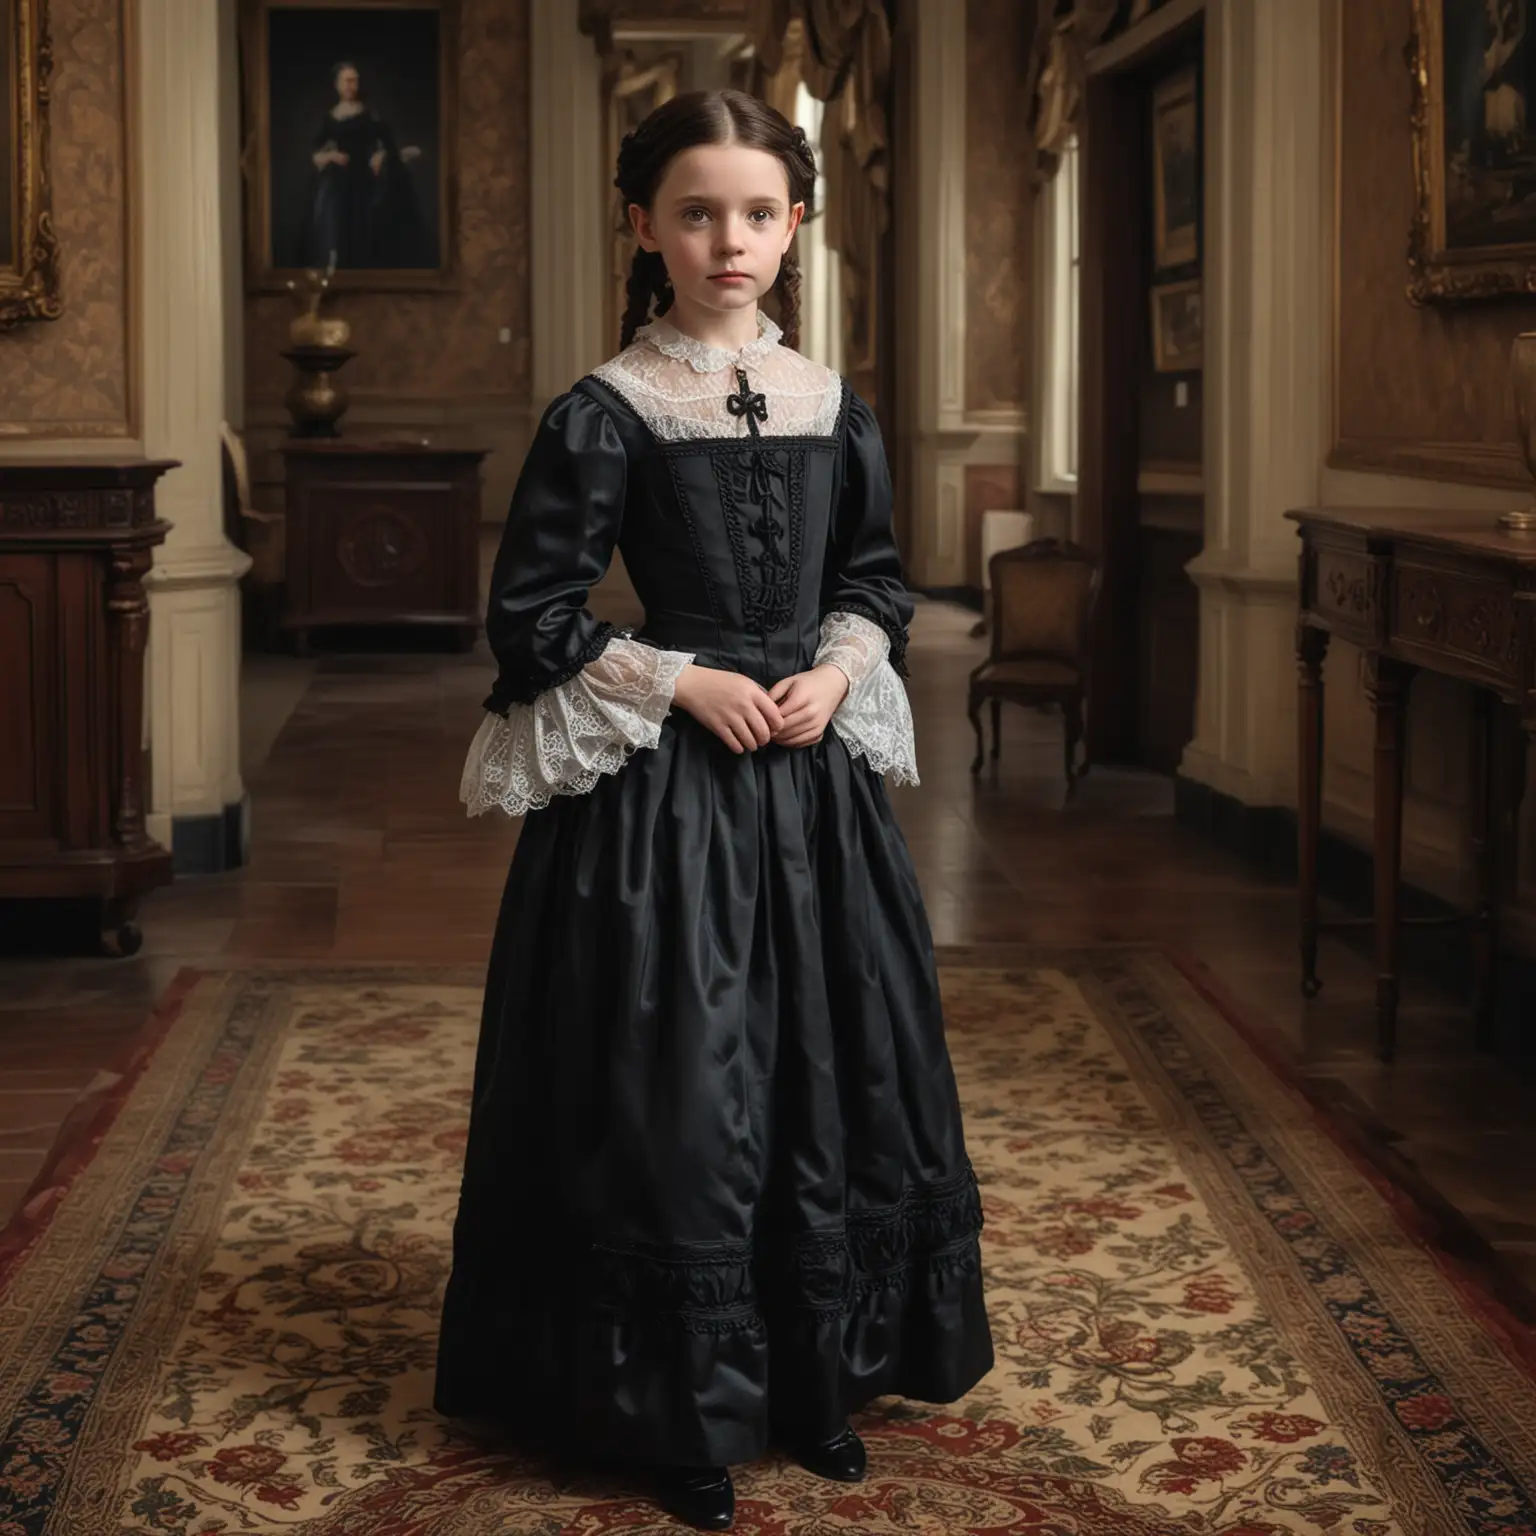 hyper realistic image. full length shot of Margaret O'Brien wearing a Victorian dress located inside castle.